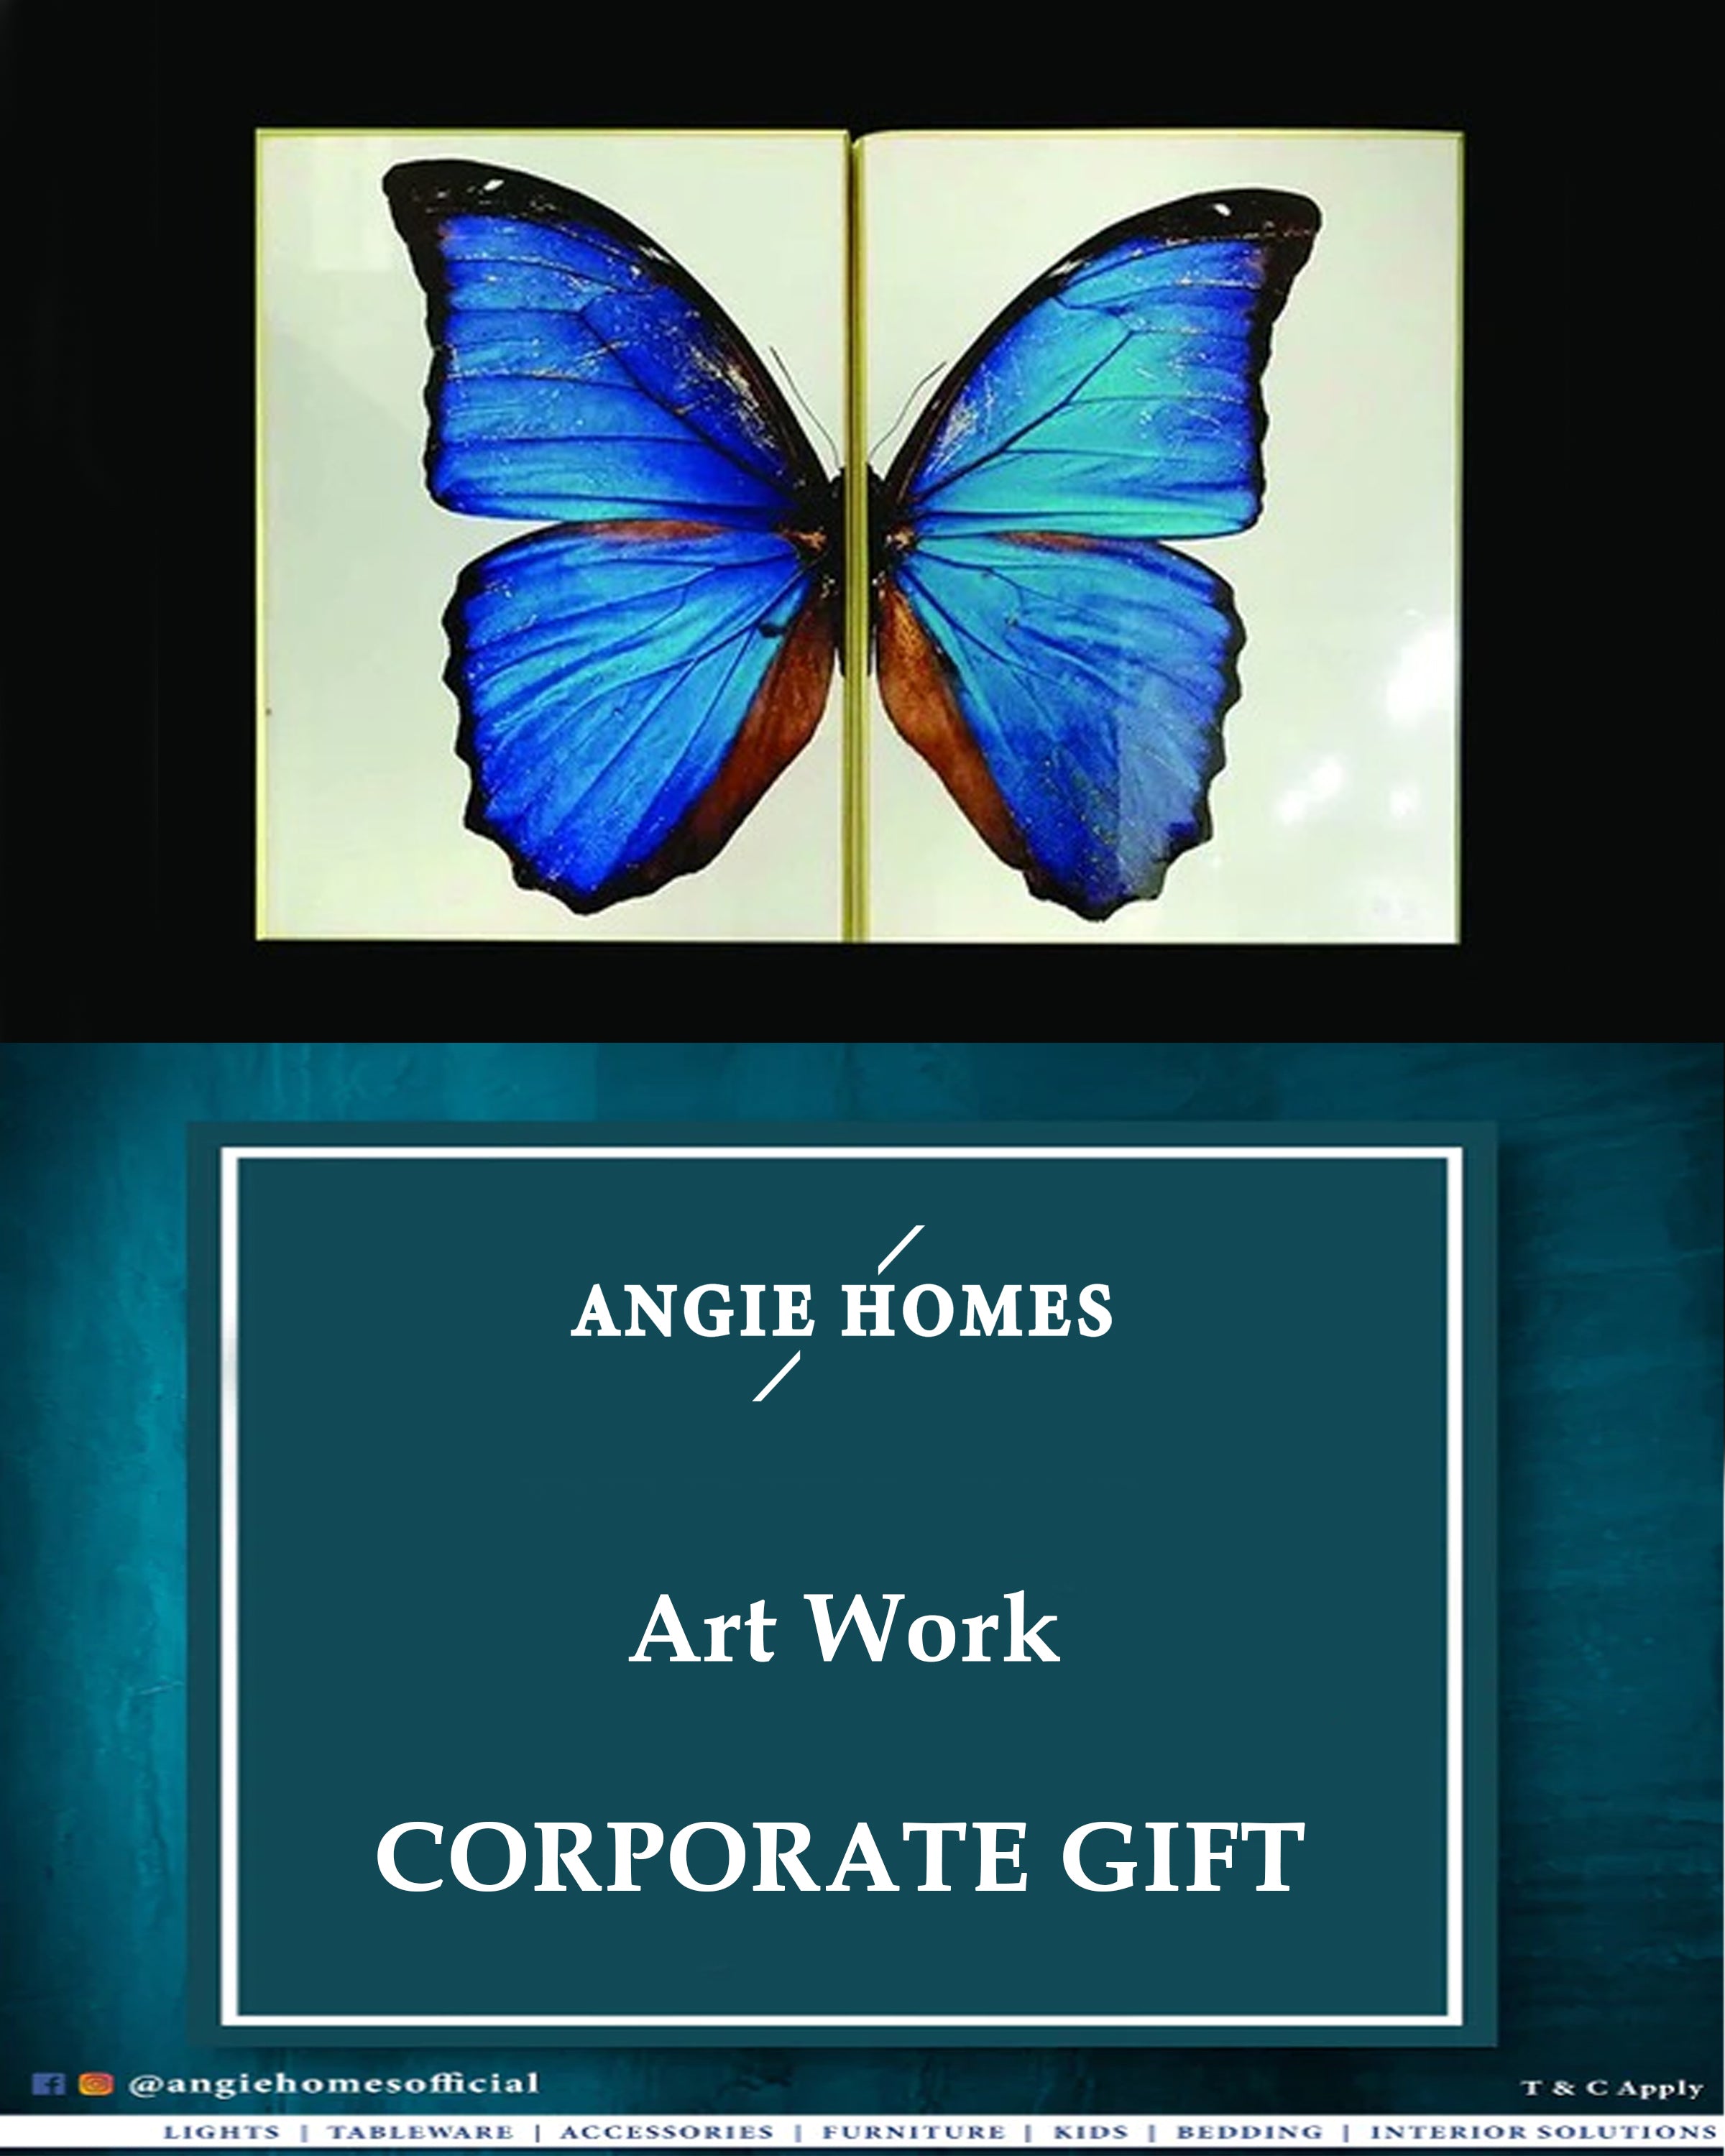 Art Work for Wedding, House Warming & Corporate Gift ANGIE HOMES